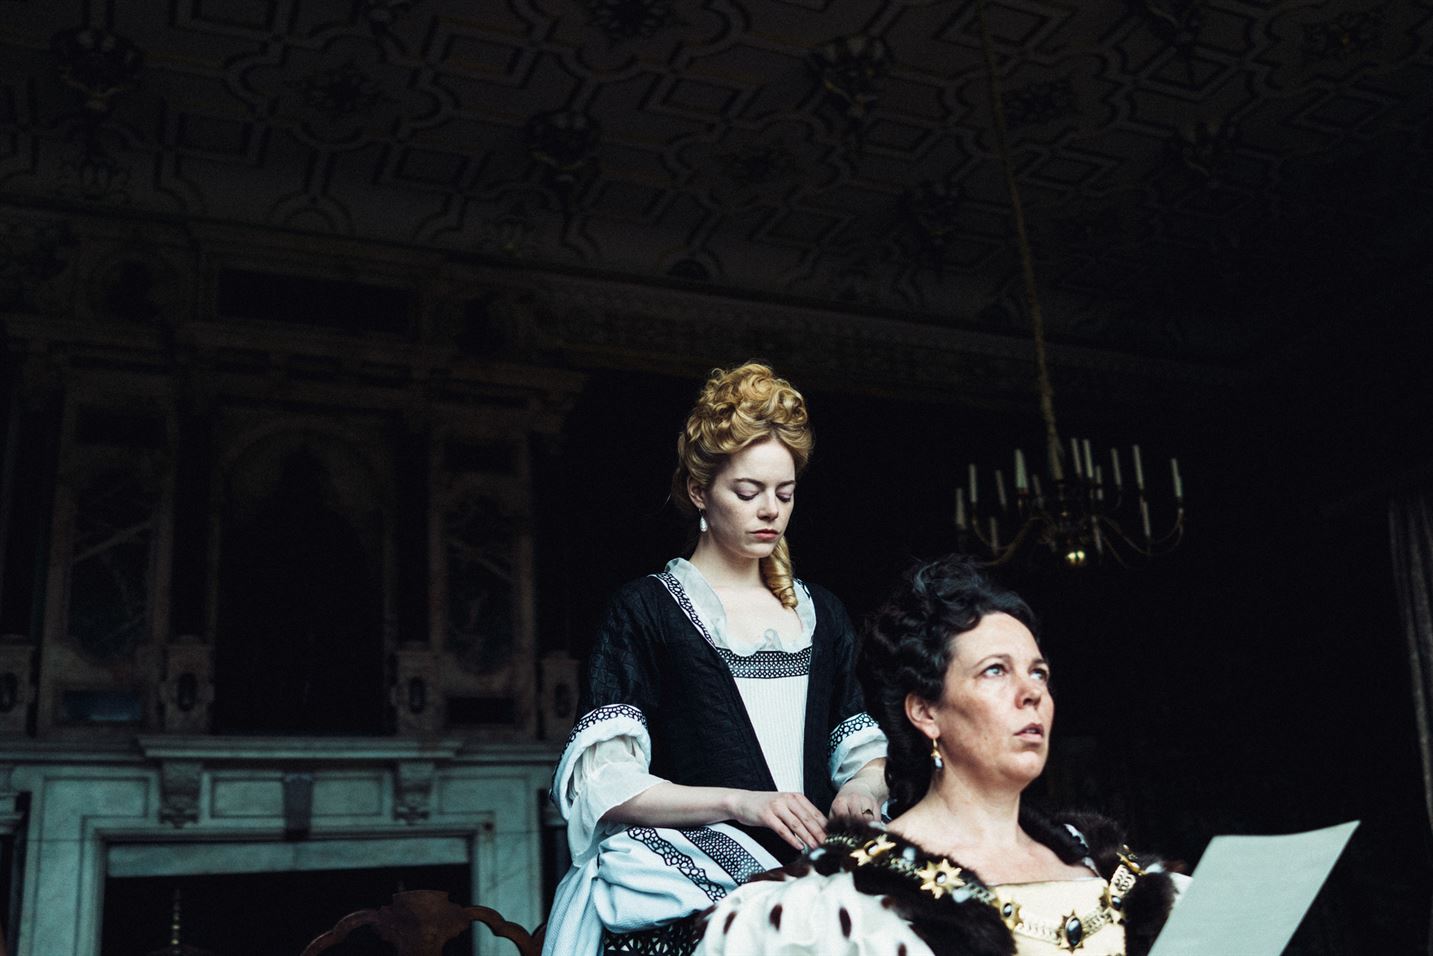 Emma Stone (left) stars in "The Favourite" as Abigail Masham, who attempts to get in the good graces of Queen Anne, played by Olivia Colman (right). Photo courtesy of Twentieth Century Fox